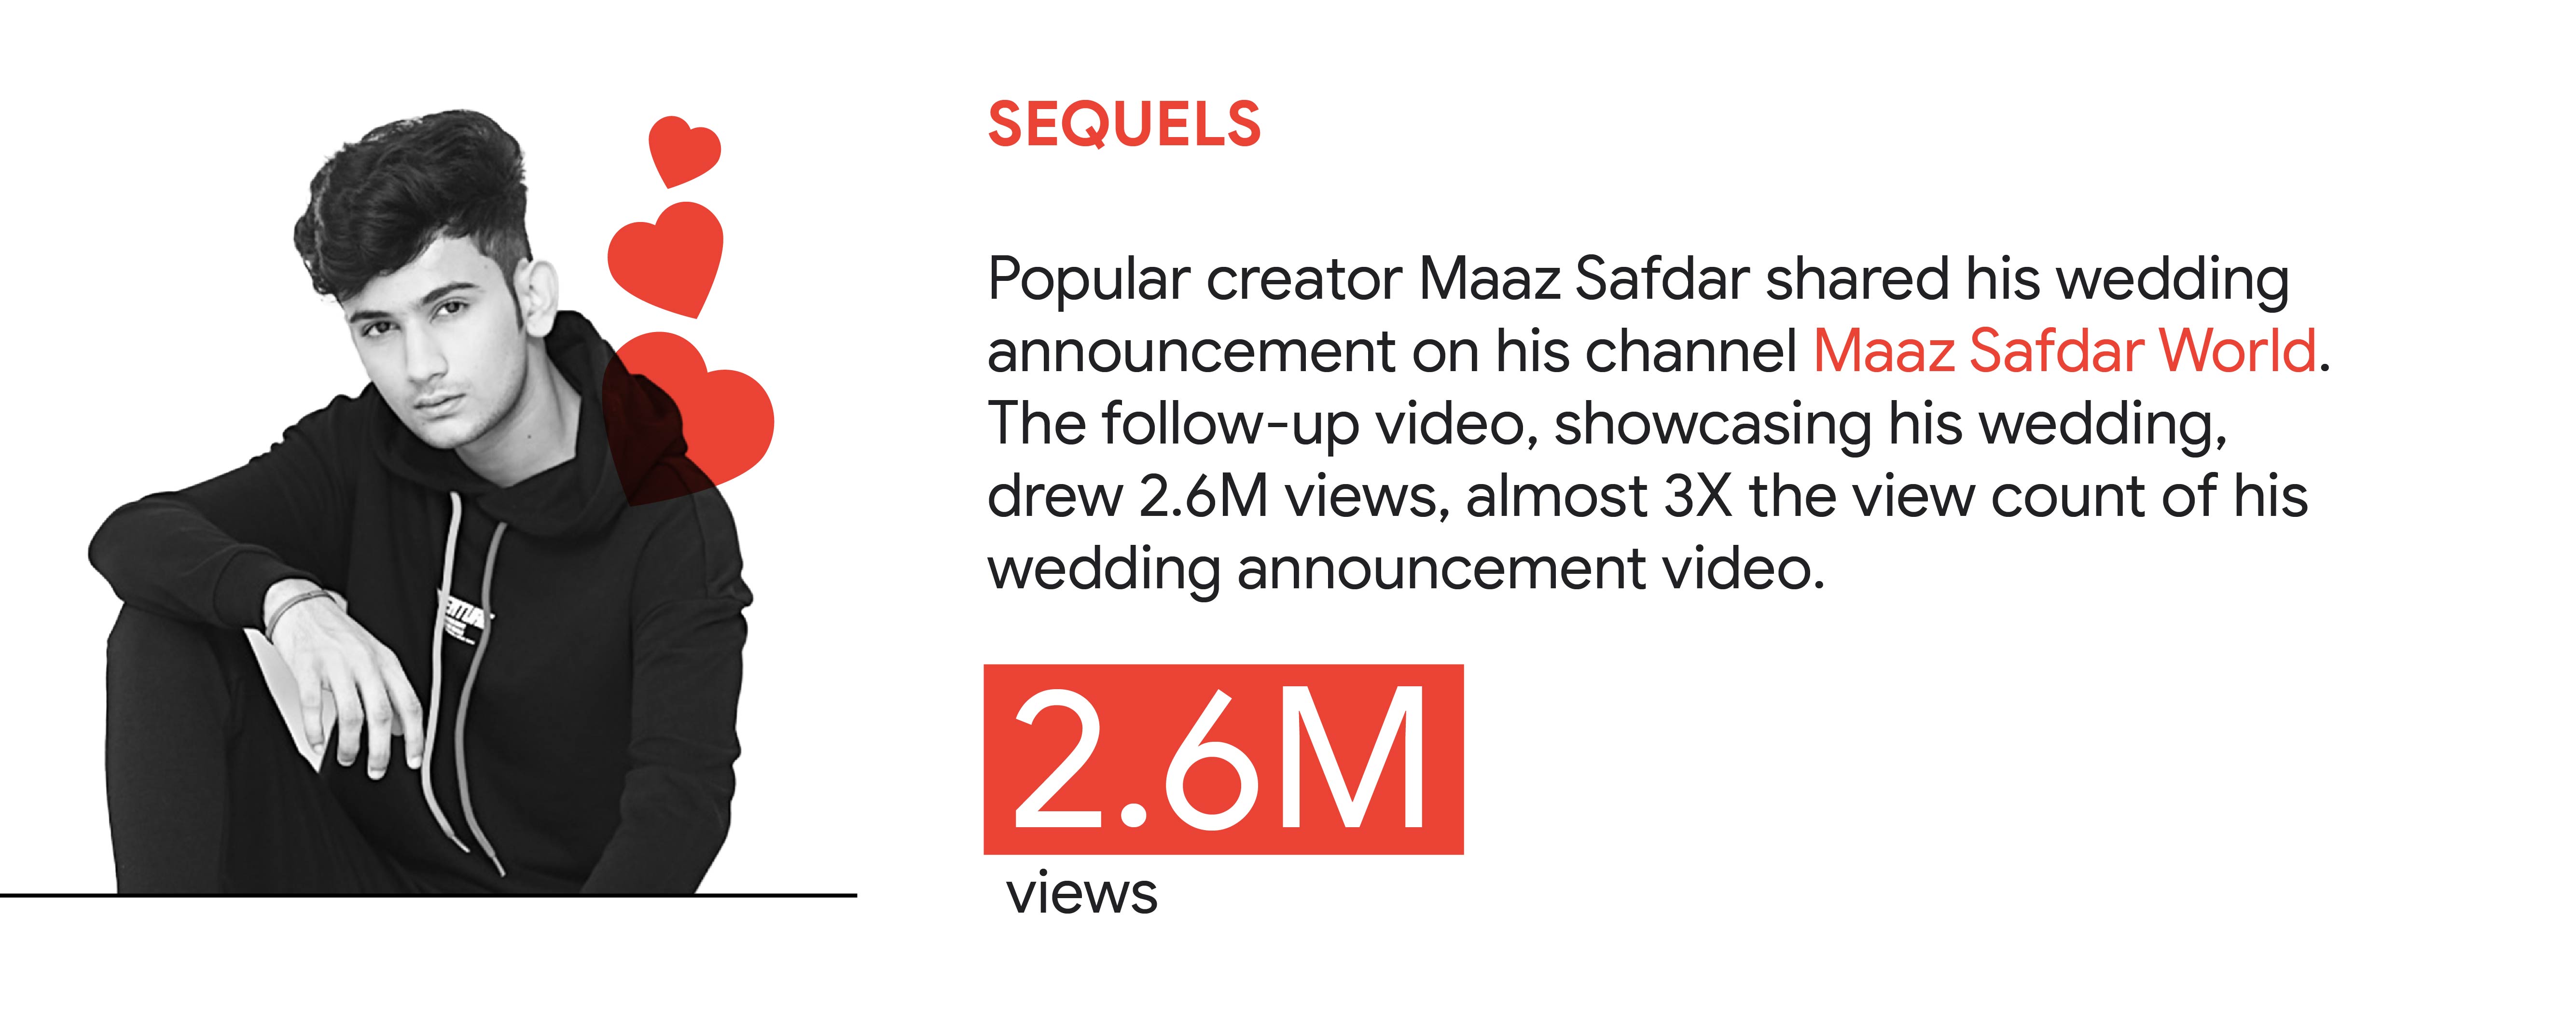 YouTube trend 1: Sequels. In Pakistan, popular creator Maaz Safdar announced his wedding on his channel Maaz Safdar World. The follow-up video, showcasing his wedding, drew 2.6M views, almost 3X the view count of his wedding announcement video.